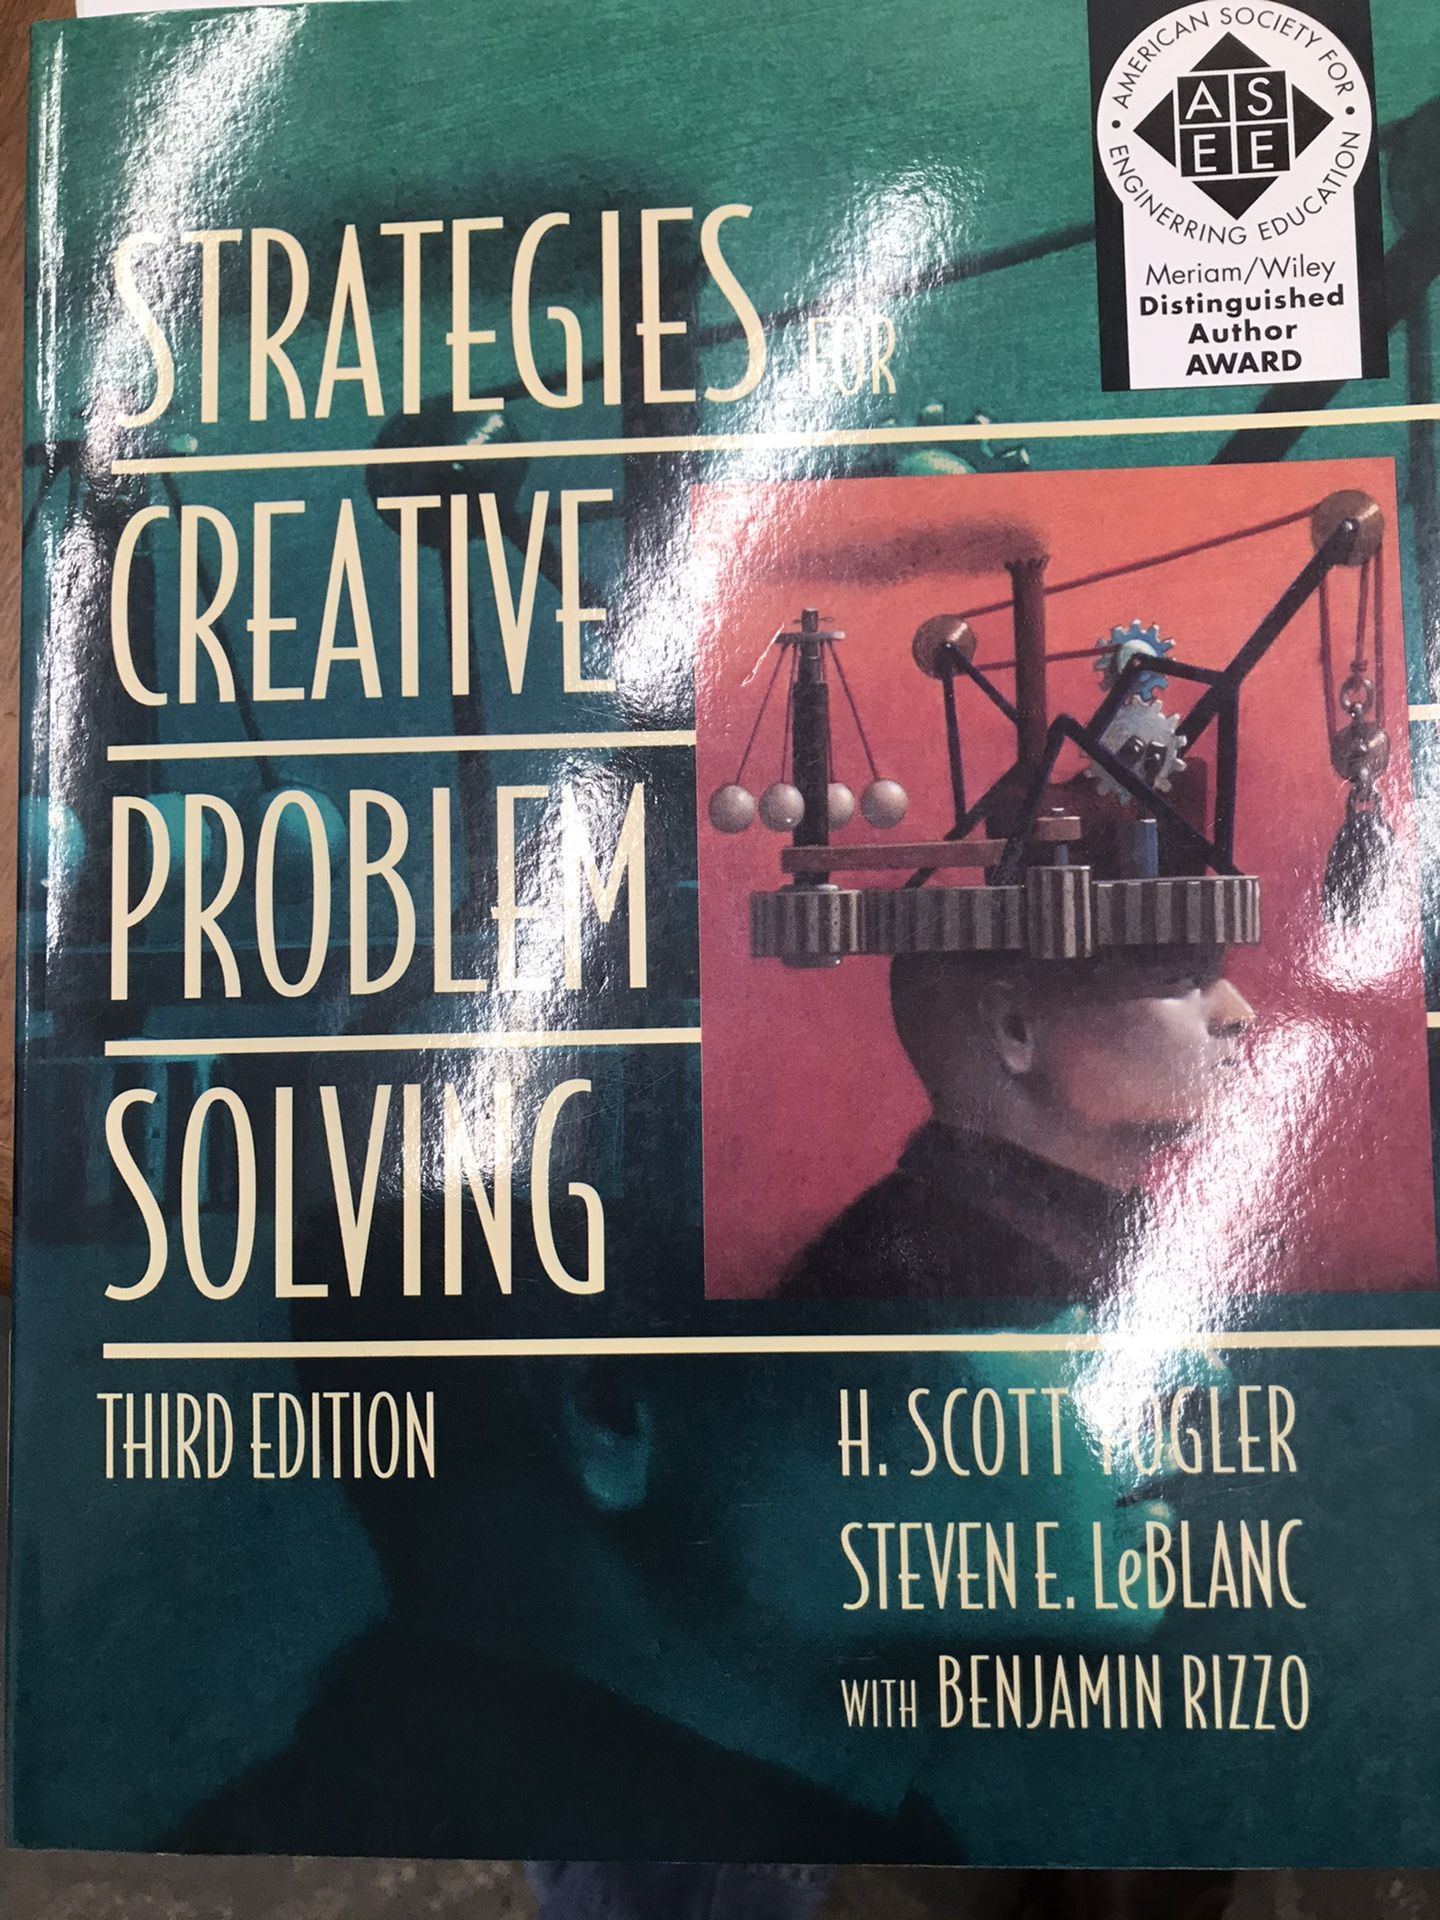 Strategies for creative problem solving